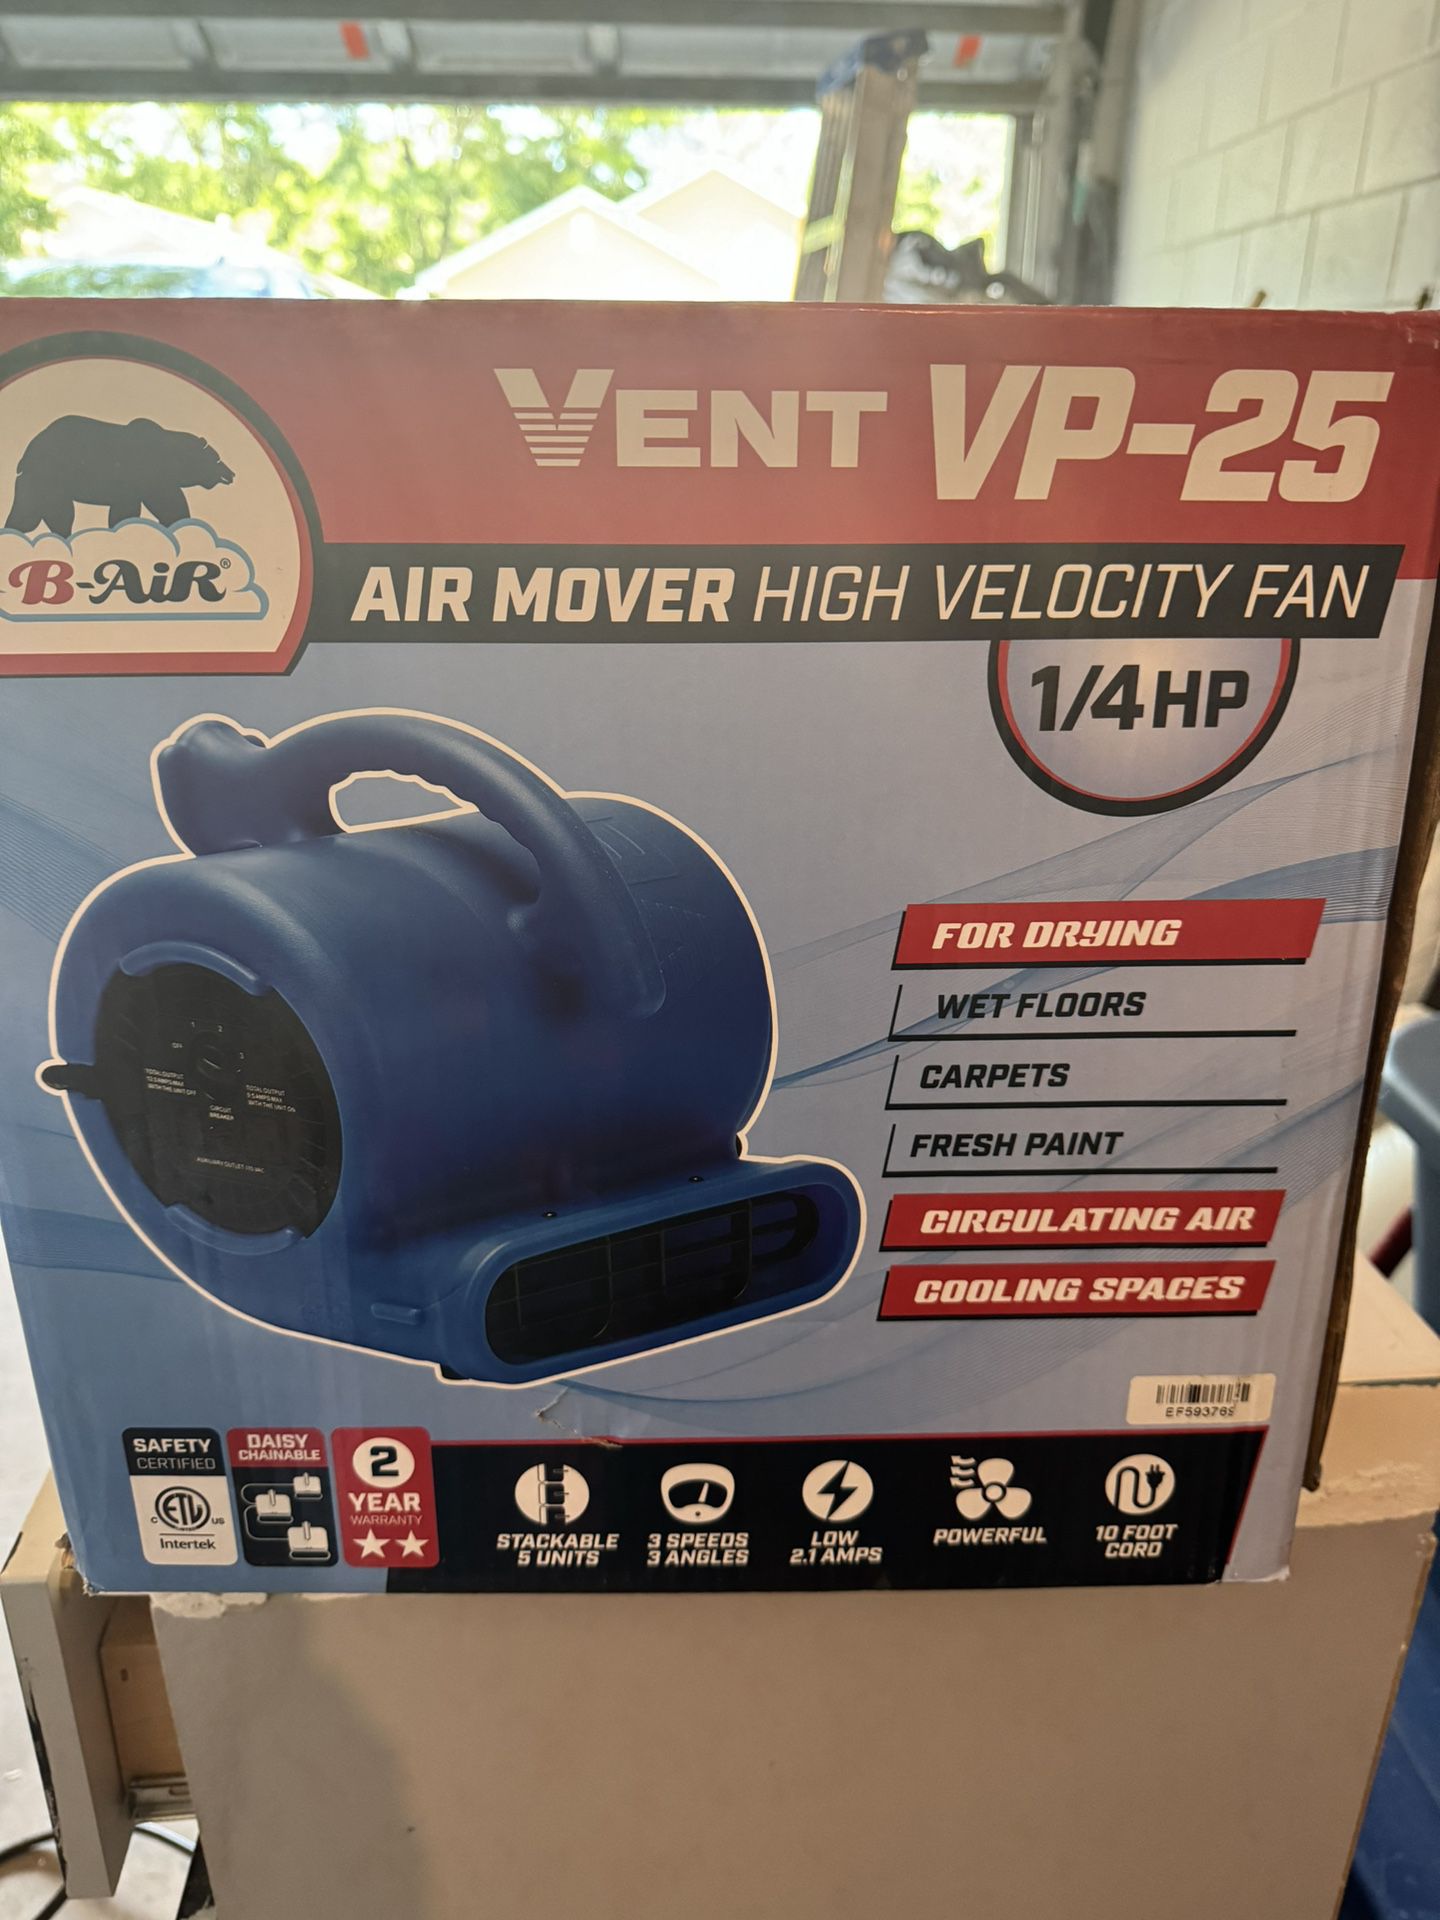 AIR MOVER HIGH VELOCITY FAN